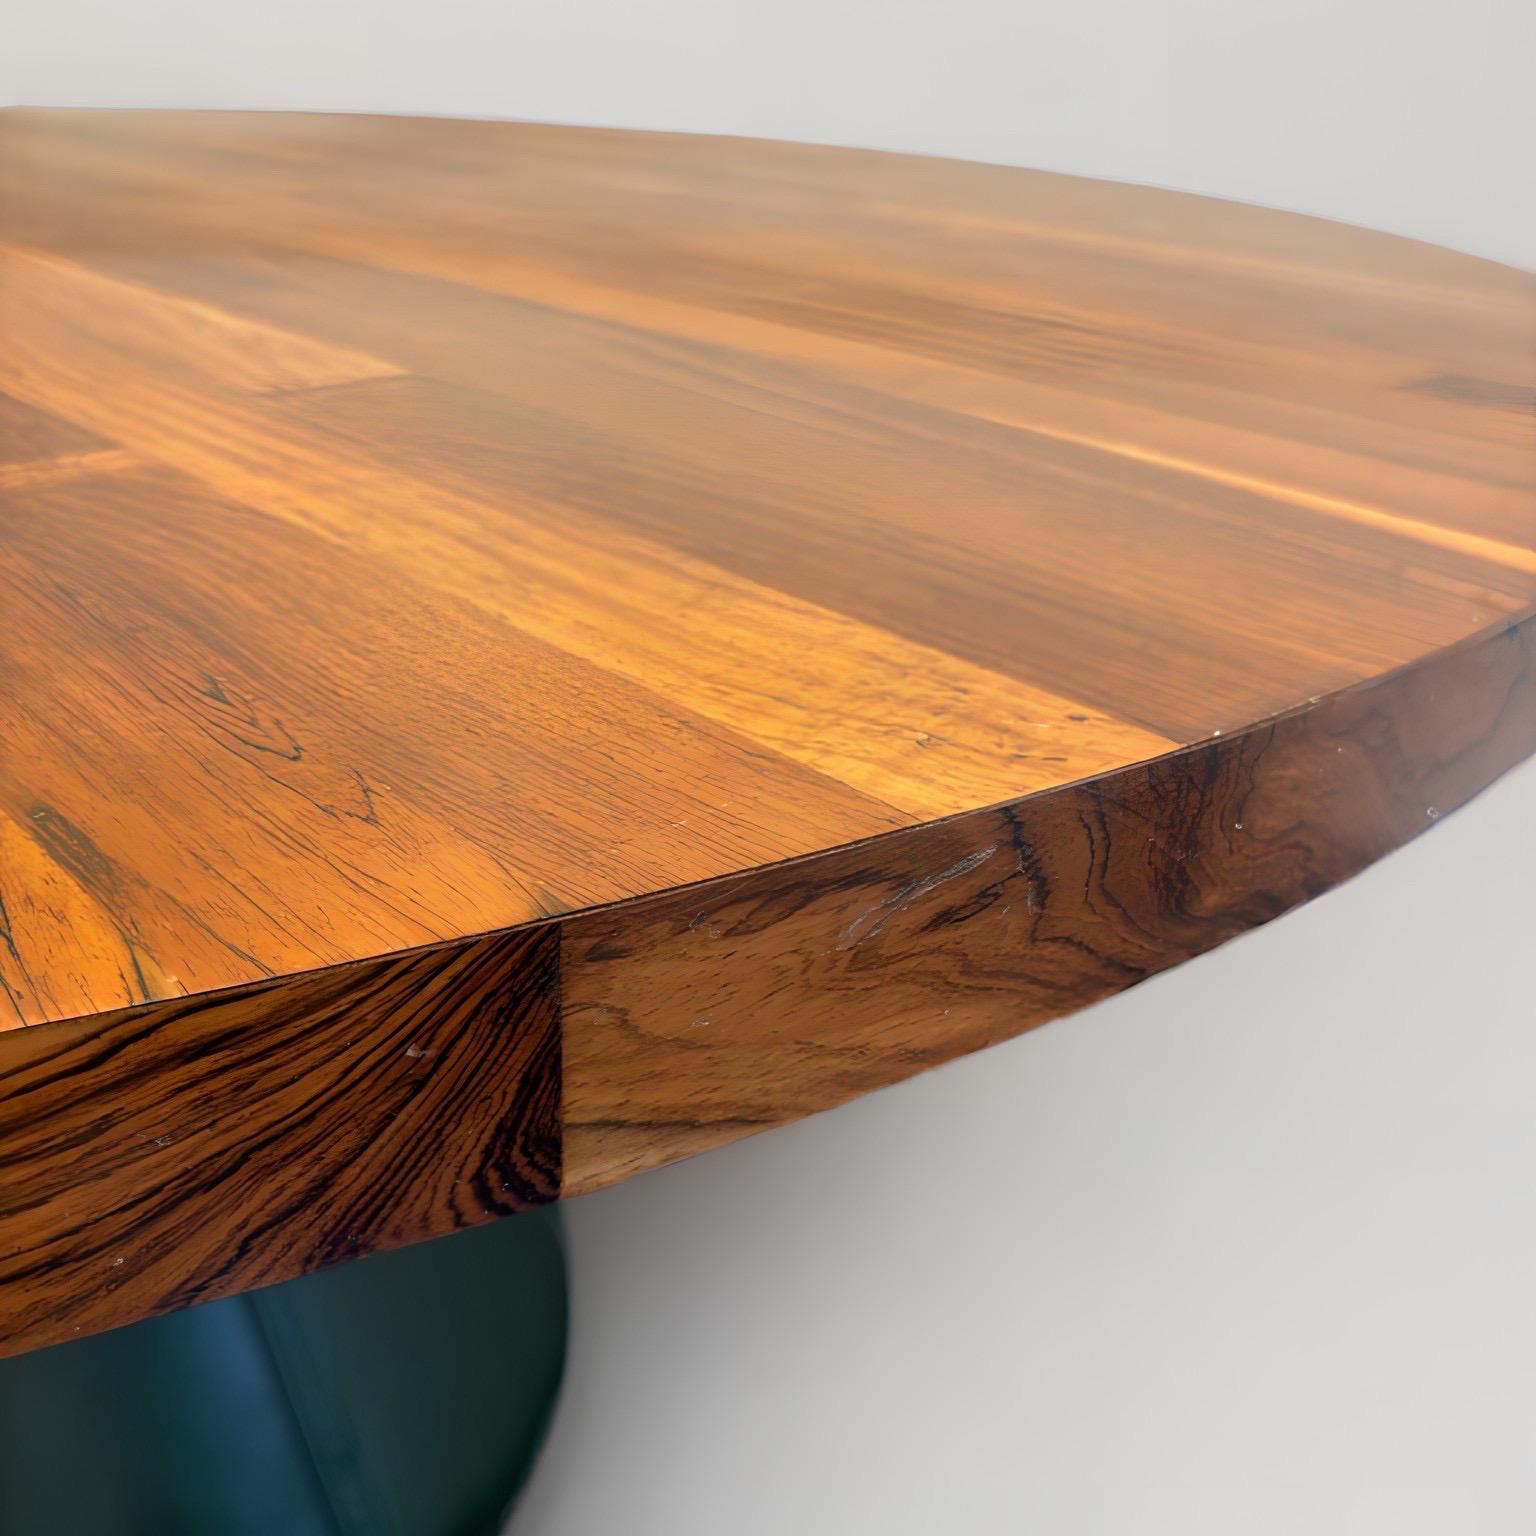 Mid-Century Modern Round Wooden Leather Dining Table by Jorge Zalszupin, 1960s For Sale 3